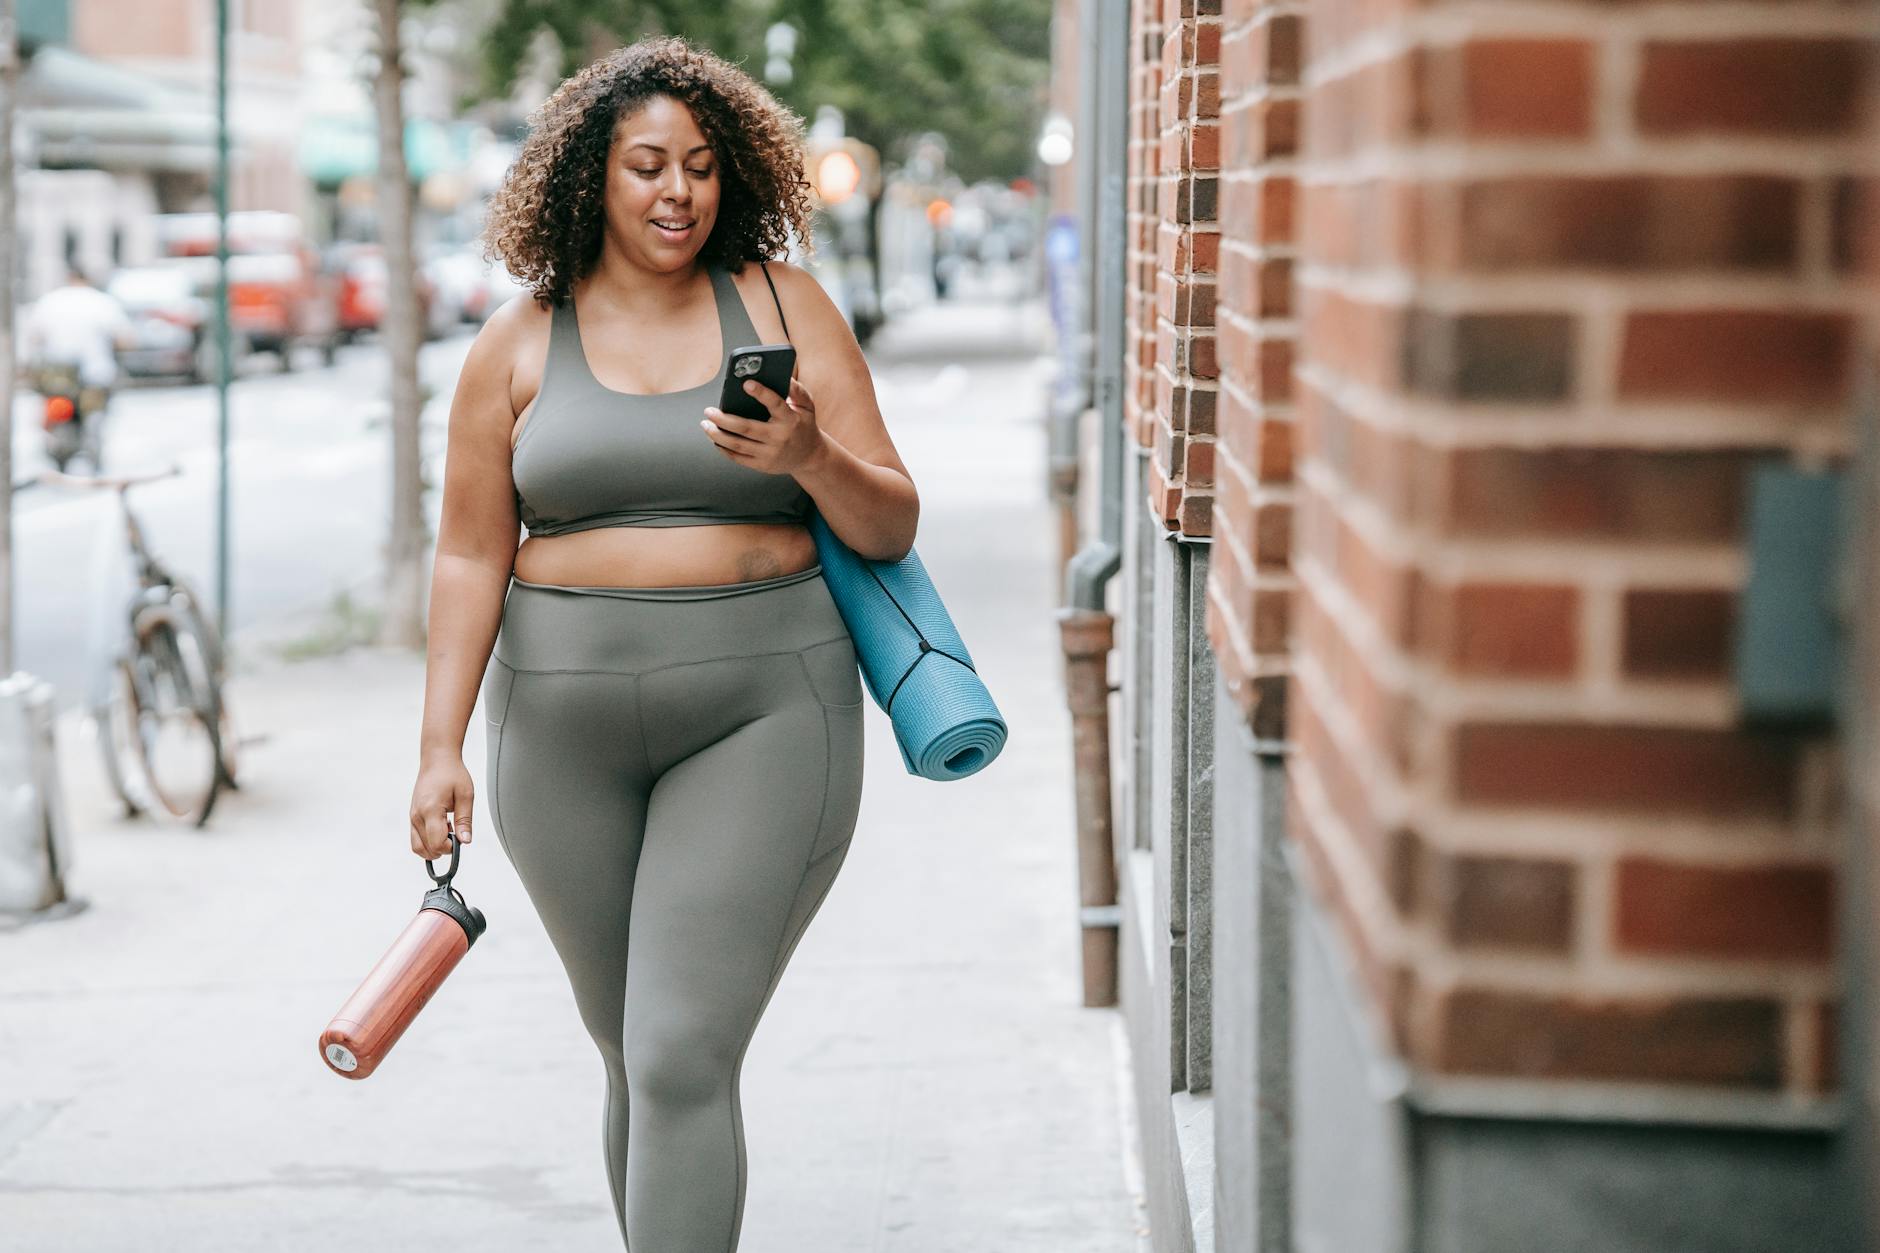 woman walking in sport clothing carrying a yoga mat and achieving health goals